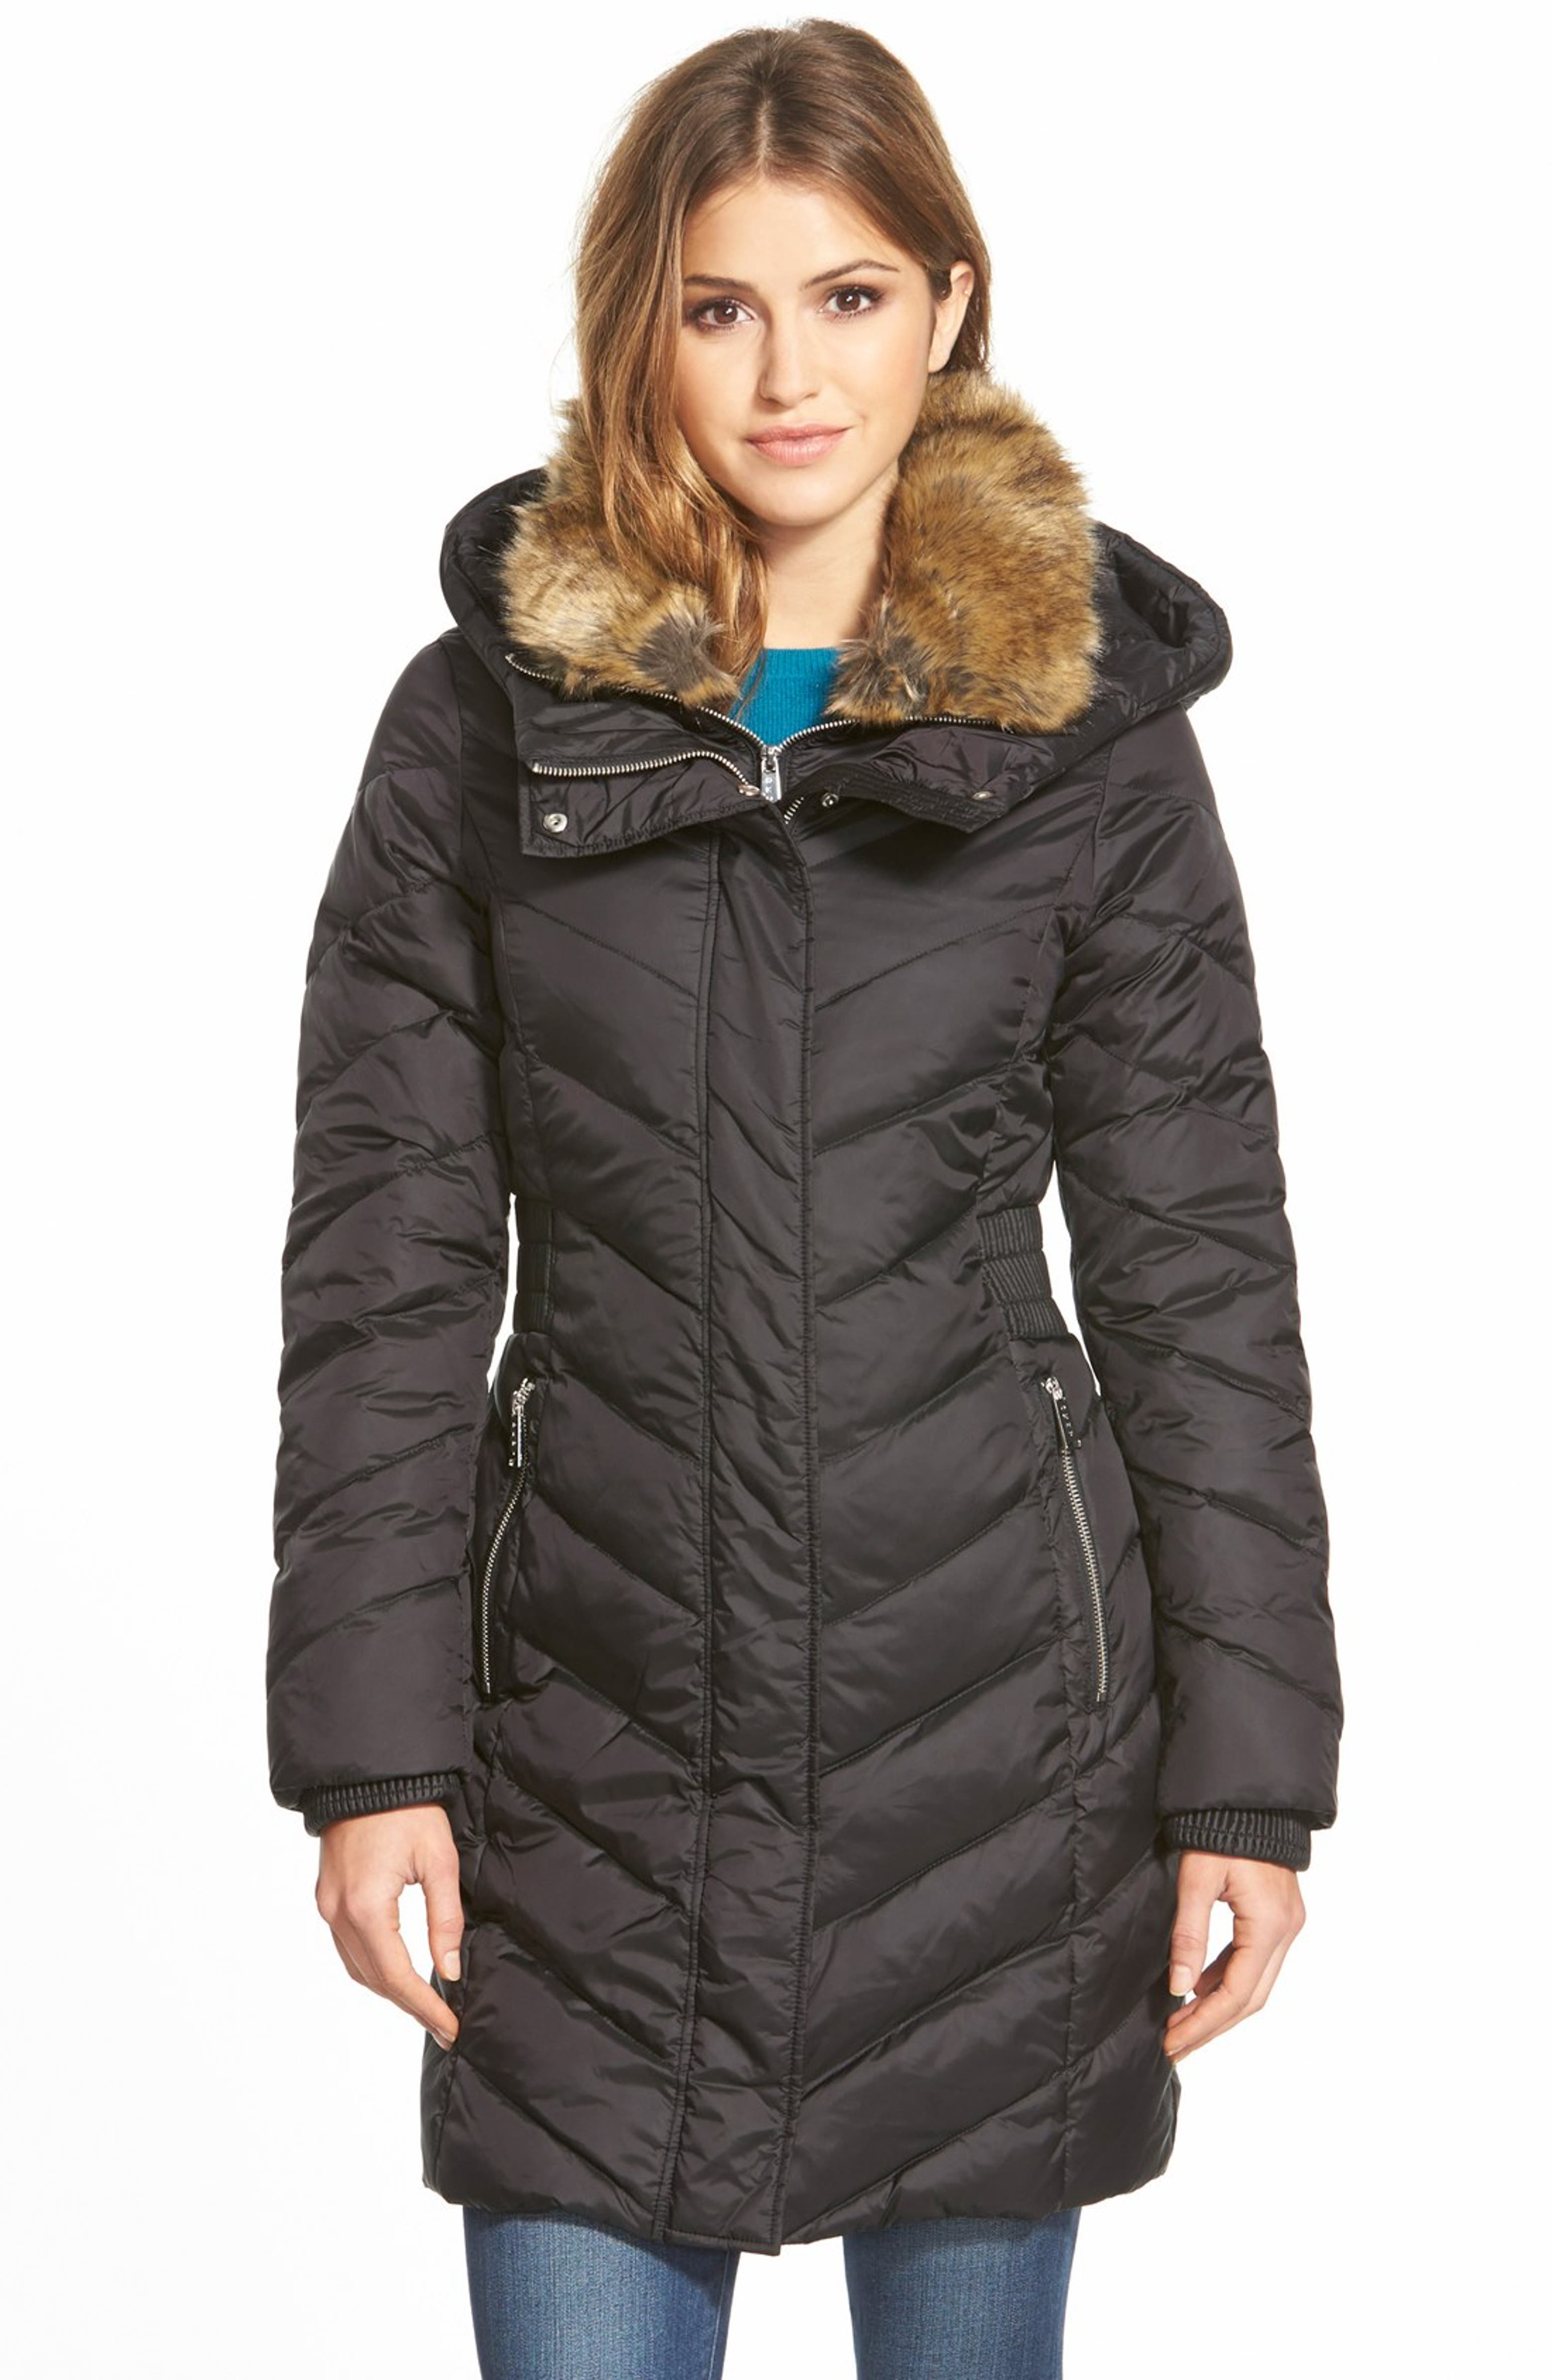 DKNY Chevron Quilted Down & Feather Fill Parka with Faux Fur Trim Inset ...